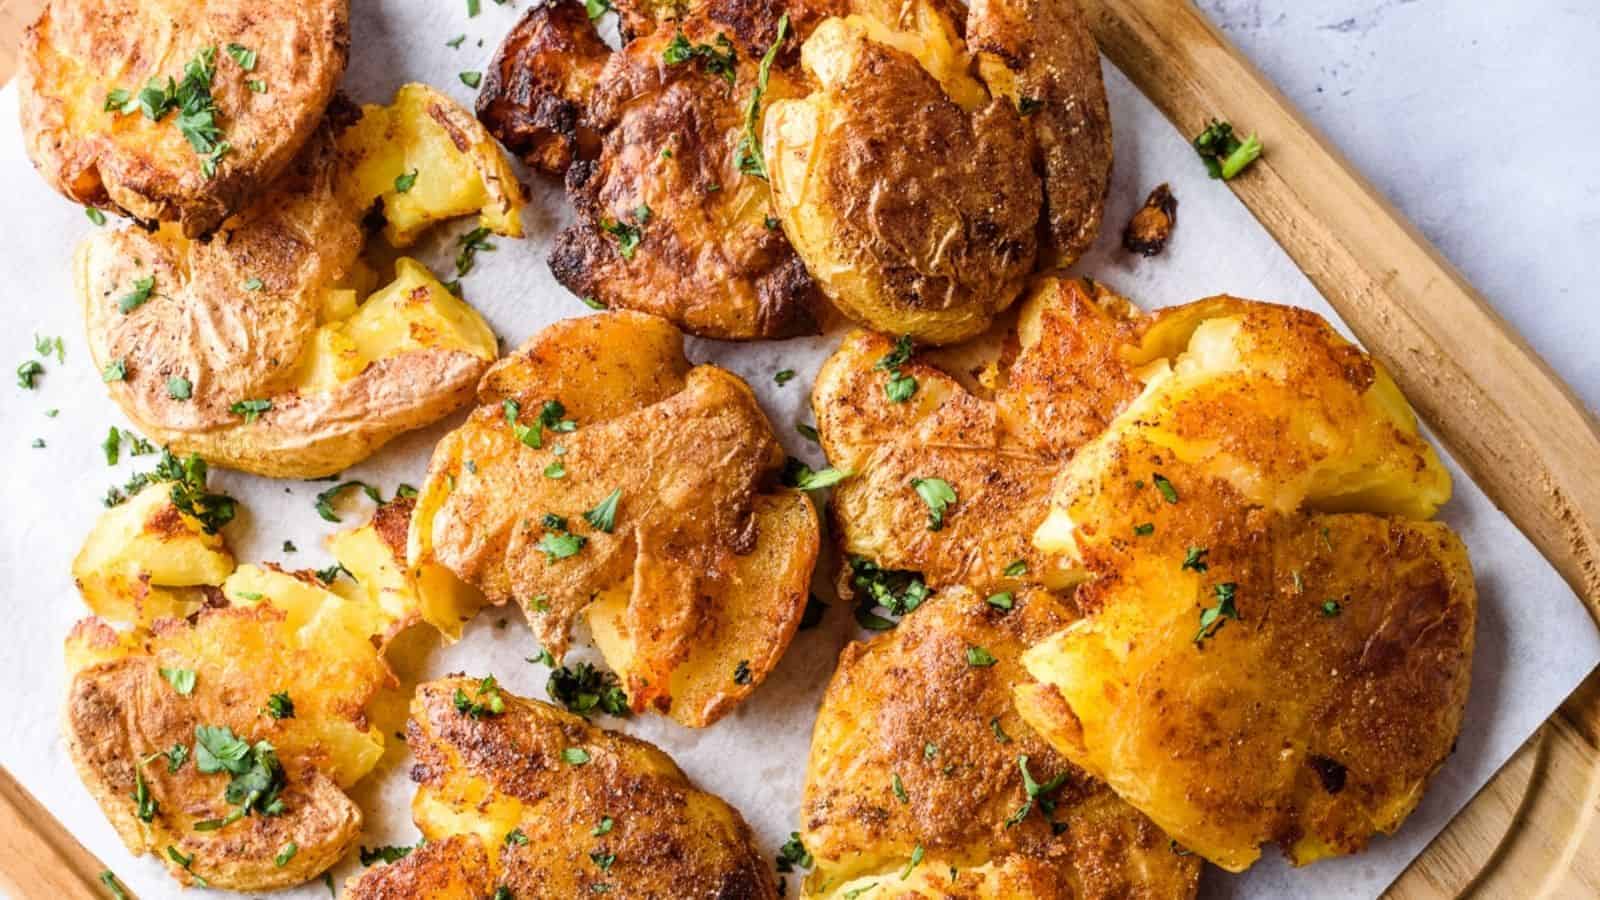 Smashed potatoes on a wooden board, crispy and golden, topped with fresh herbs.